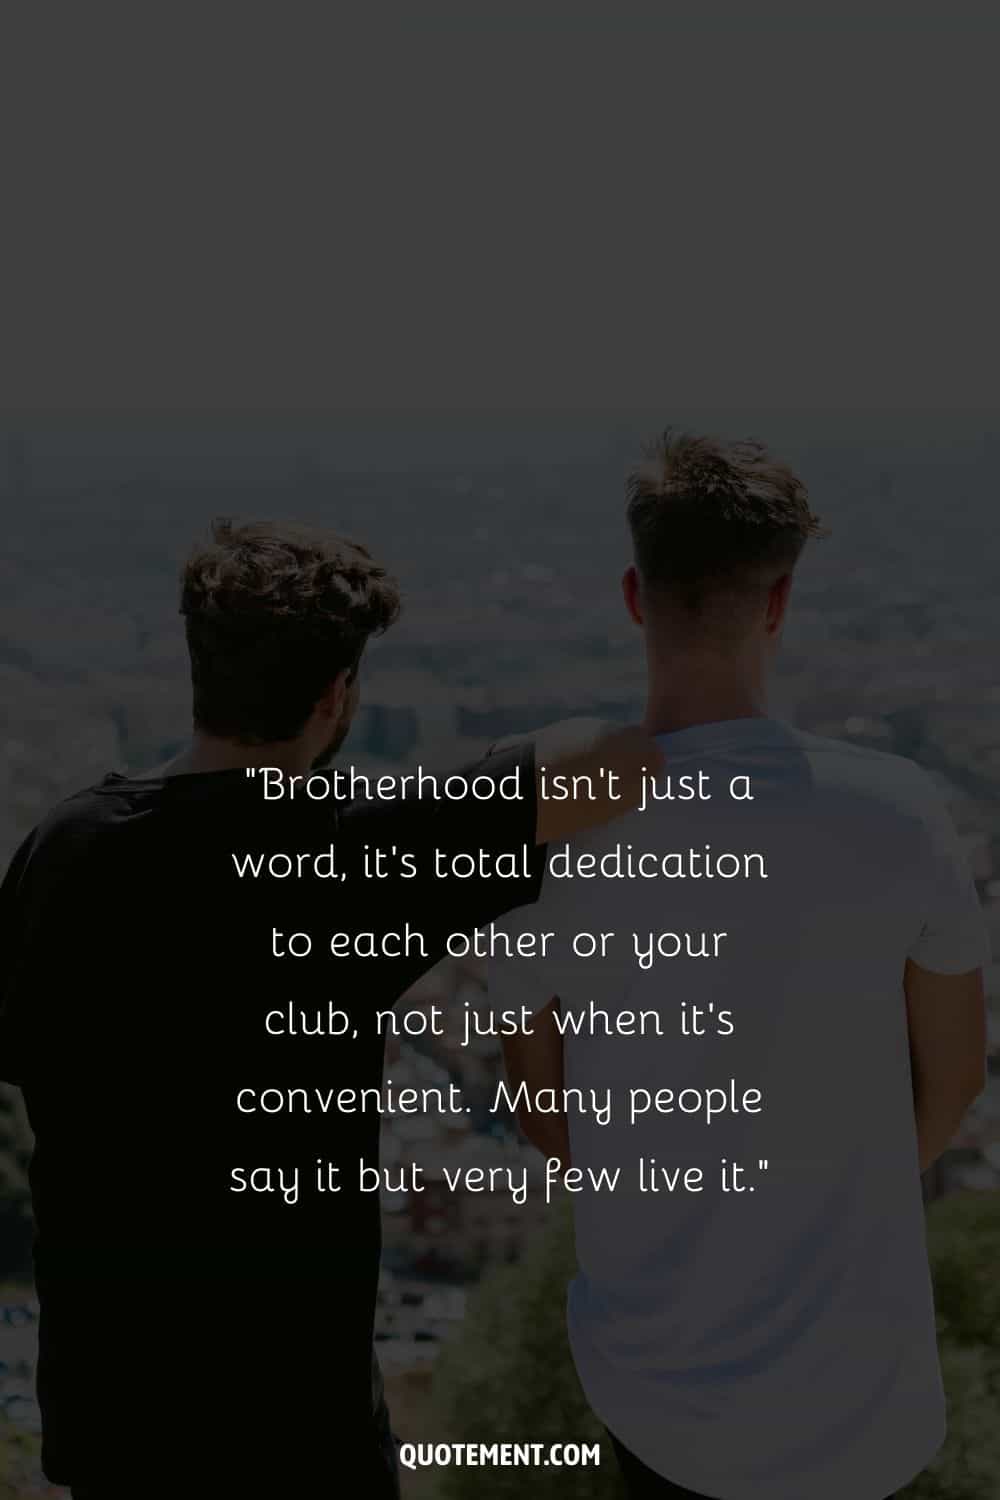 “Brotherhood isn’t just a word, it’s total dedication to each other or your club, not just when it’s convenient. Many people say it but very few live it.” — Unknown